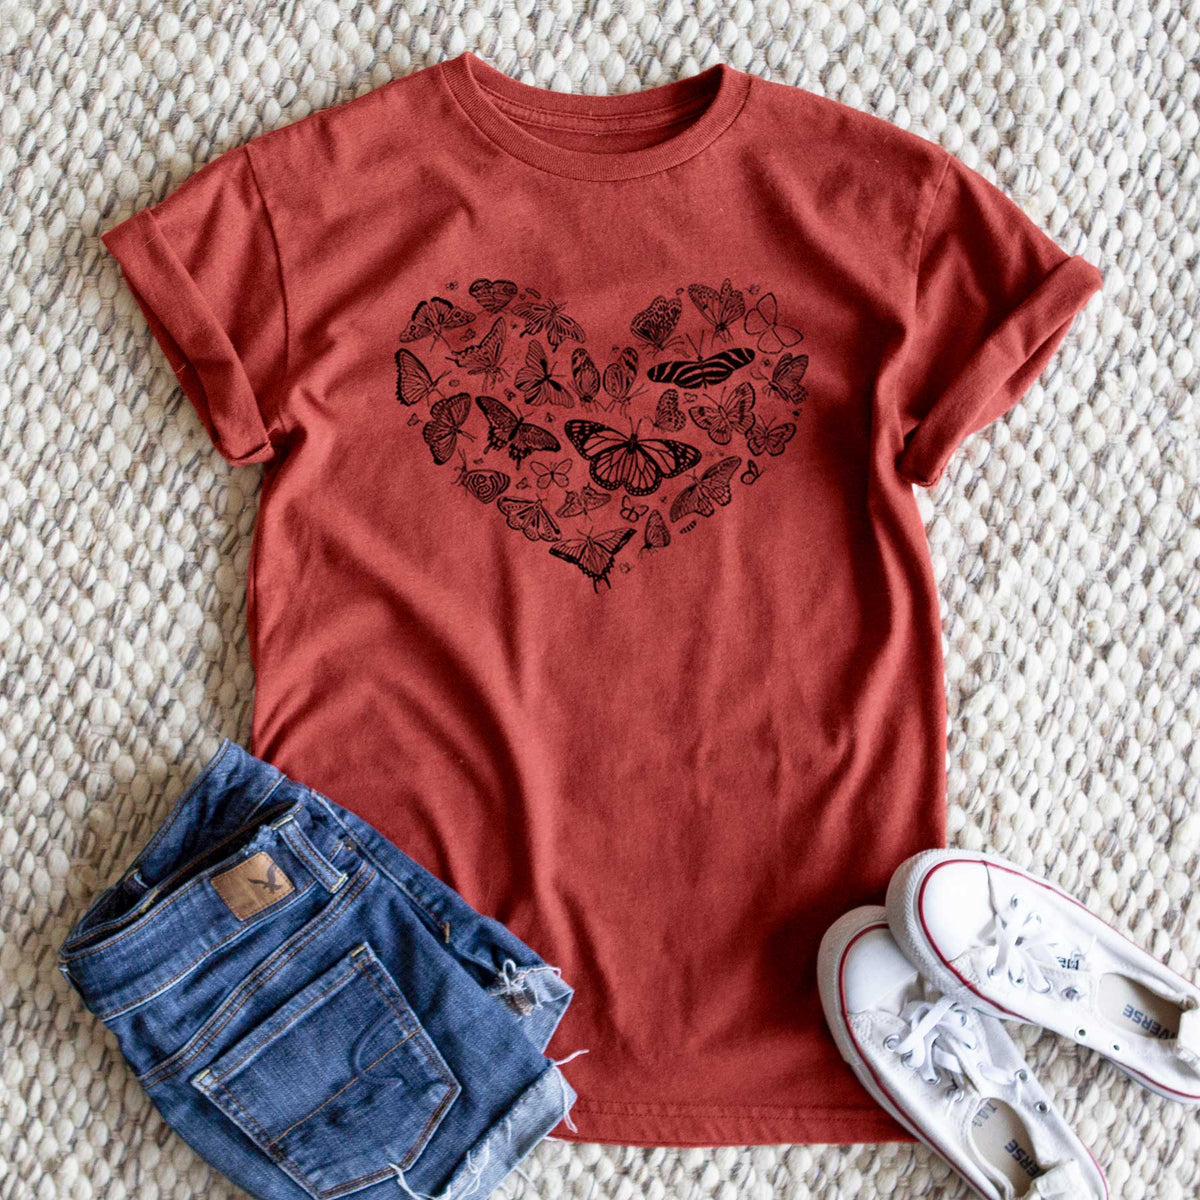 Heart Full of Butterflies - Unisex Recycled Eco Tee  - CLOSEOUT - FINAL SALE